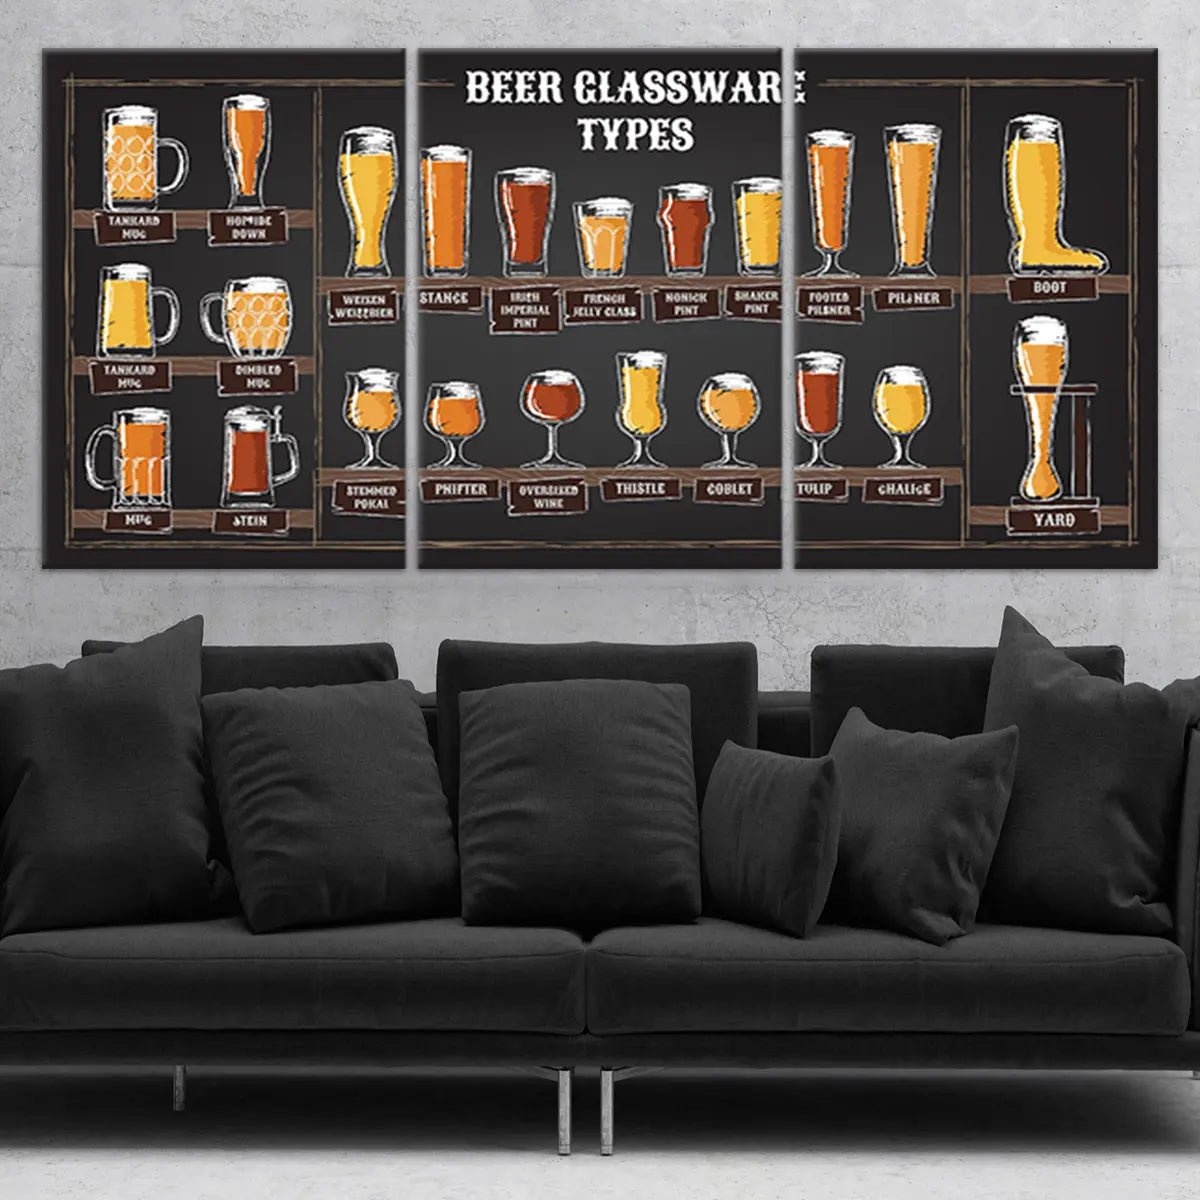 https://cdn.shopify.com/s/files/1/0099/0363/6546/products/Beer-Glassware-Wall-Art-Framed-canvas-prints-_2-173814_1600x.webp?v=1680095309